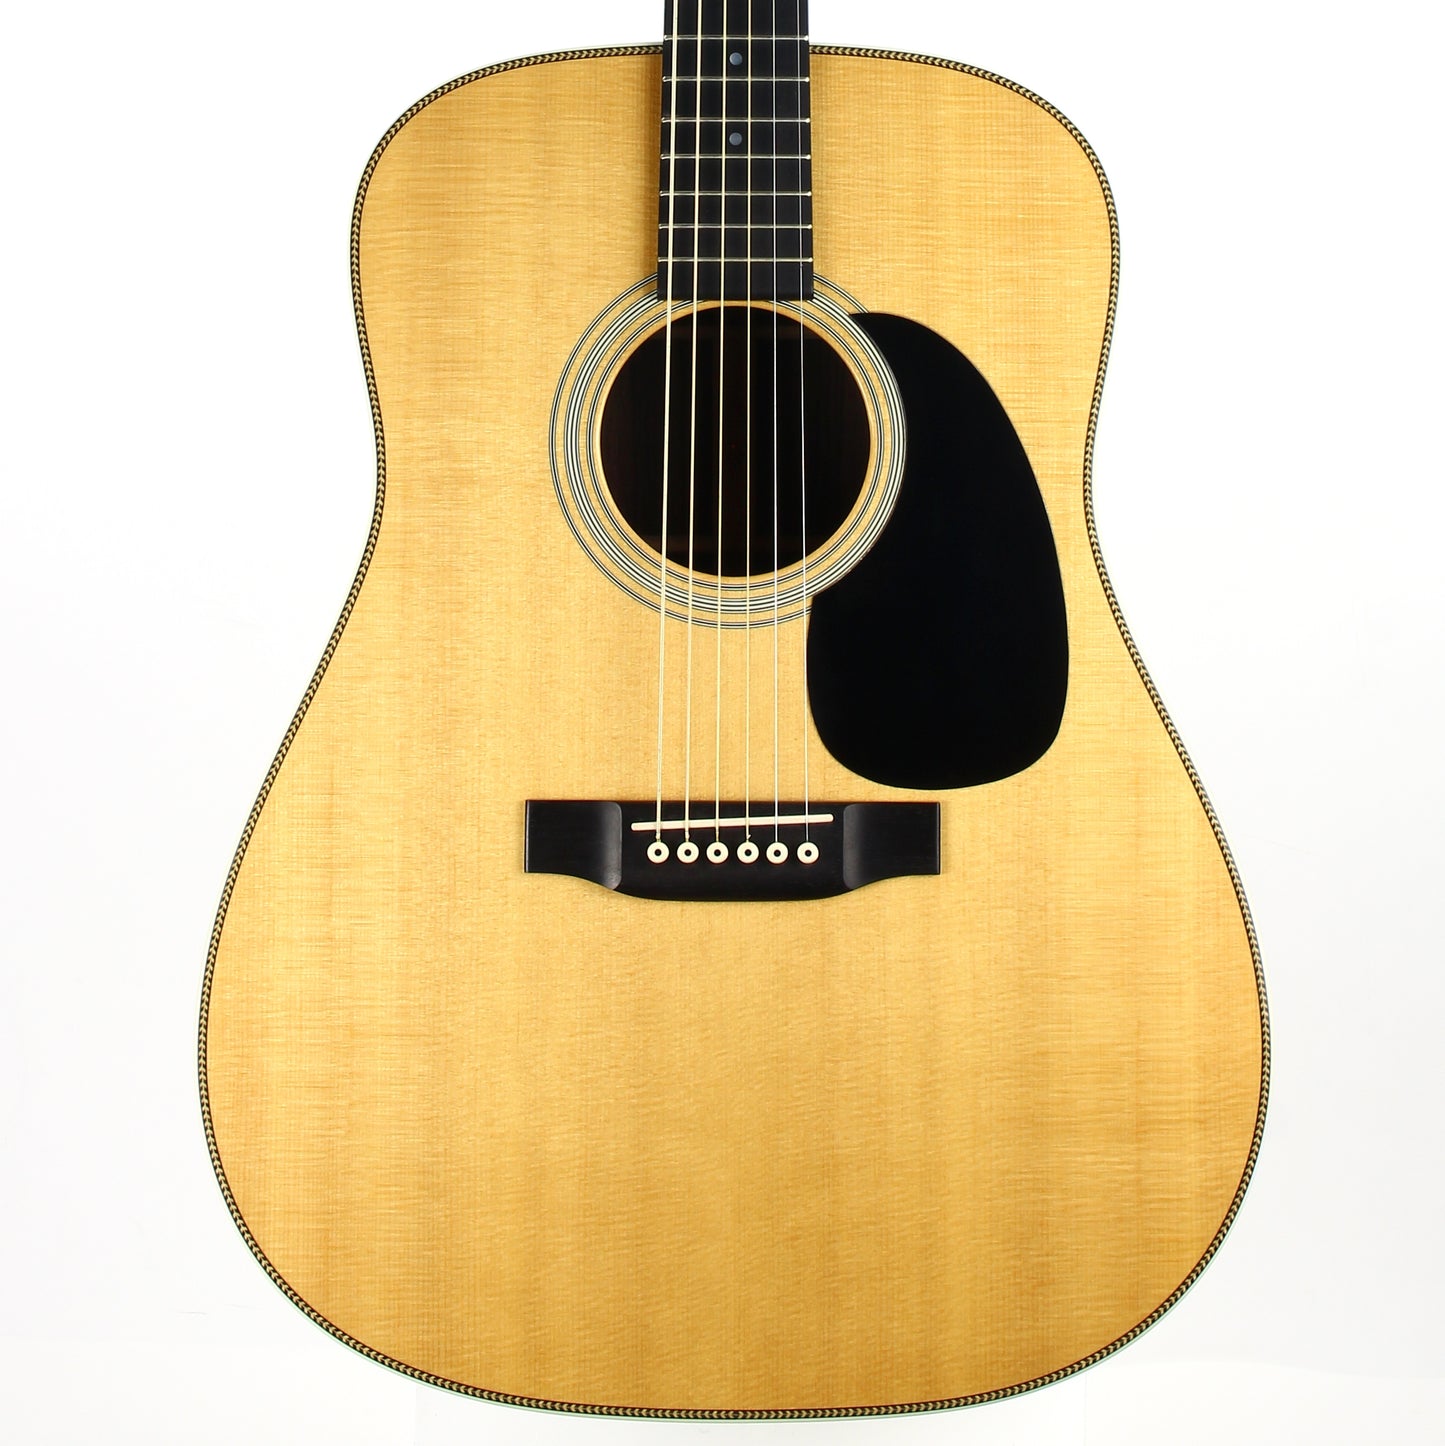 MINTY w/ TAGS! 1993 Martin HD-28 Herringbone D28 Vintage Dreadnought Acoustic Guitar - Rosewood & Spruce